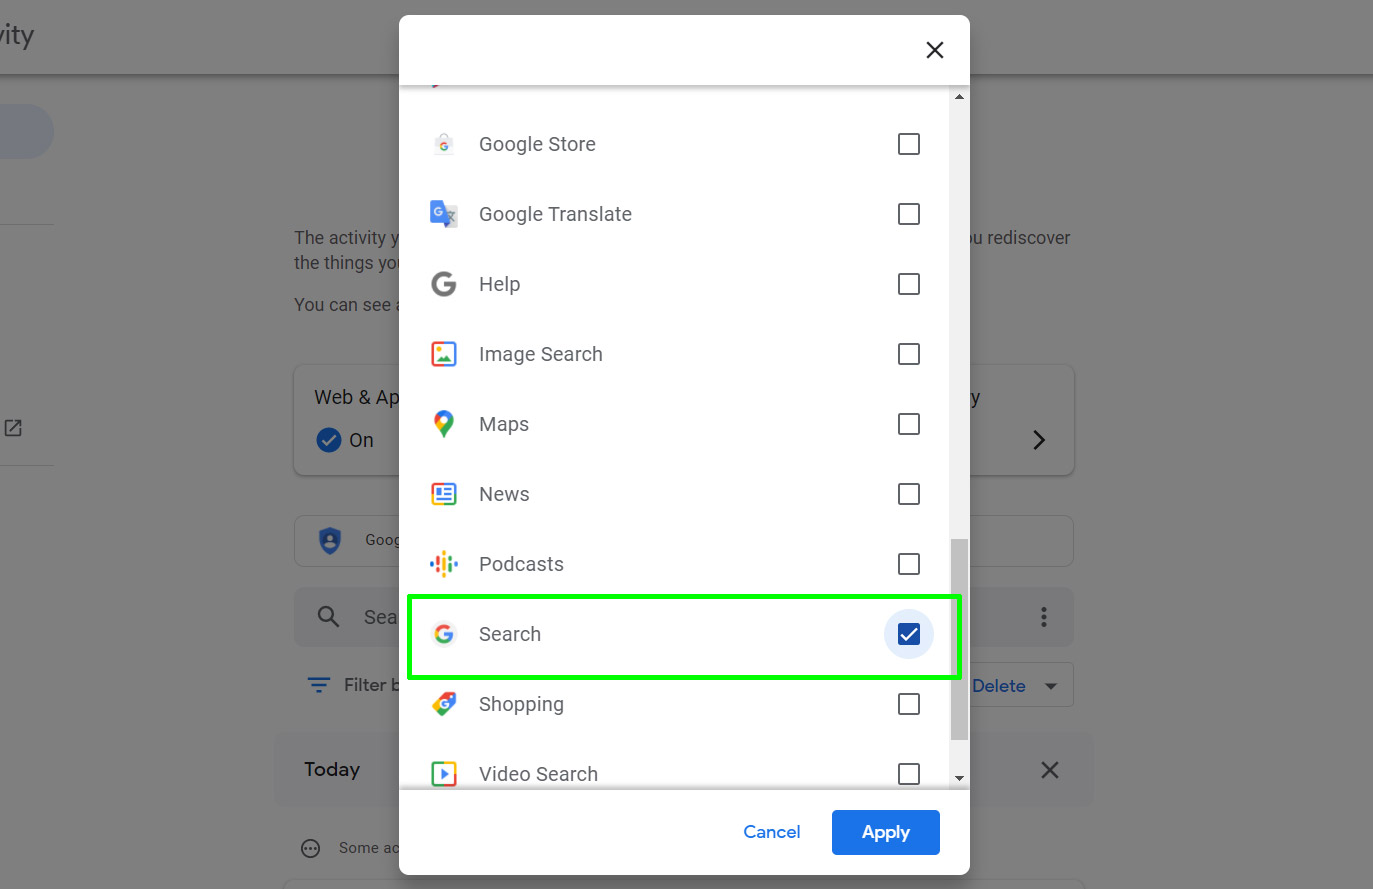 How to delete Google Search history - Pop-up window listing Google apps and services